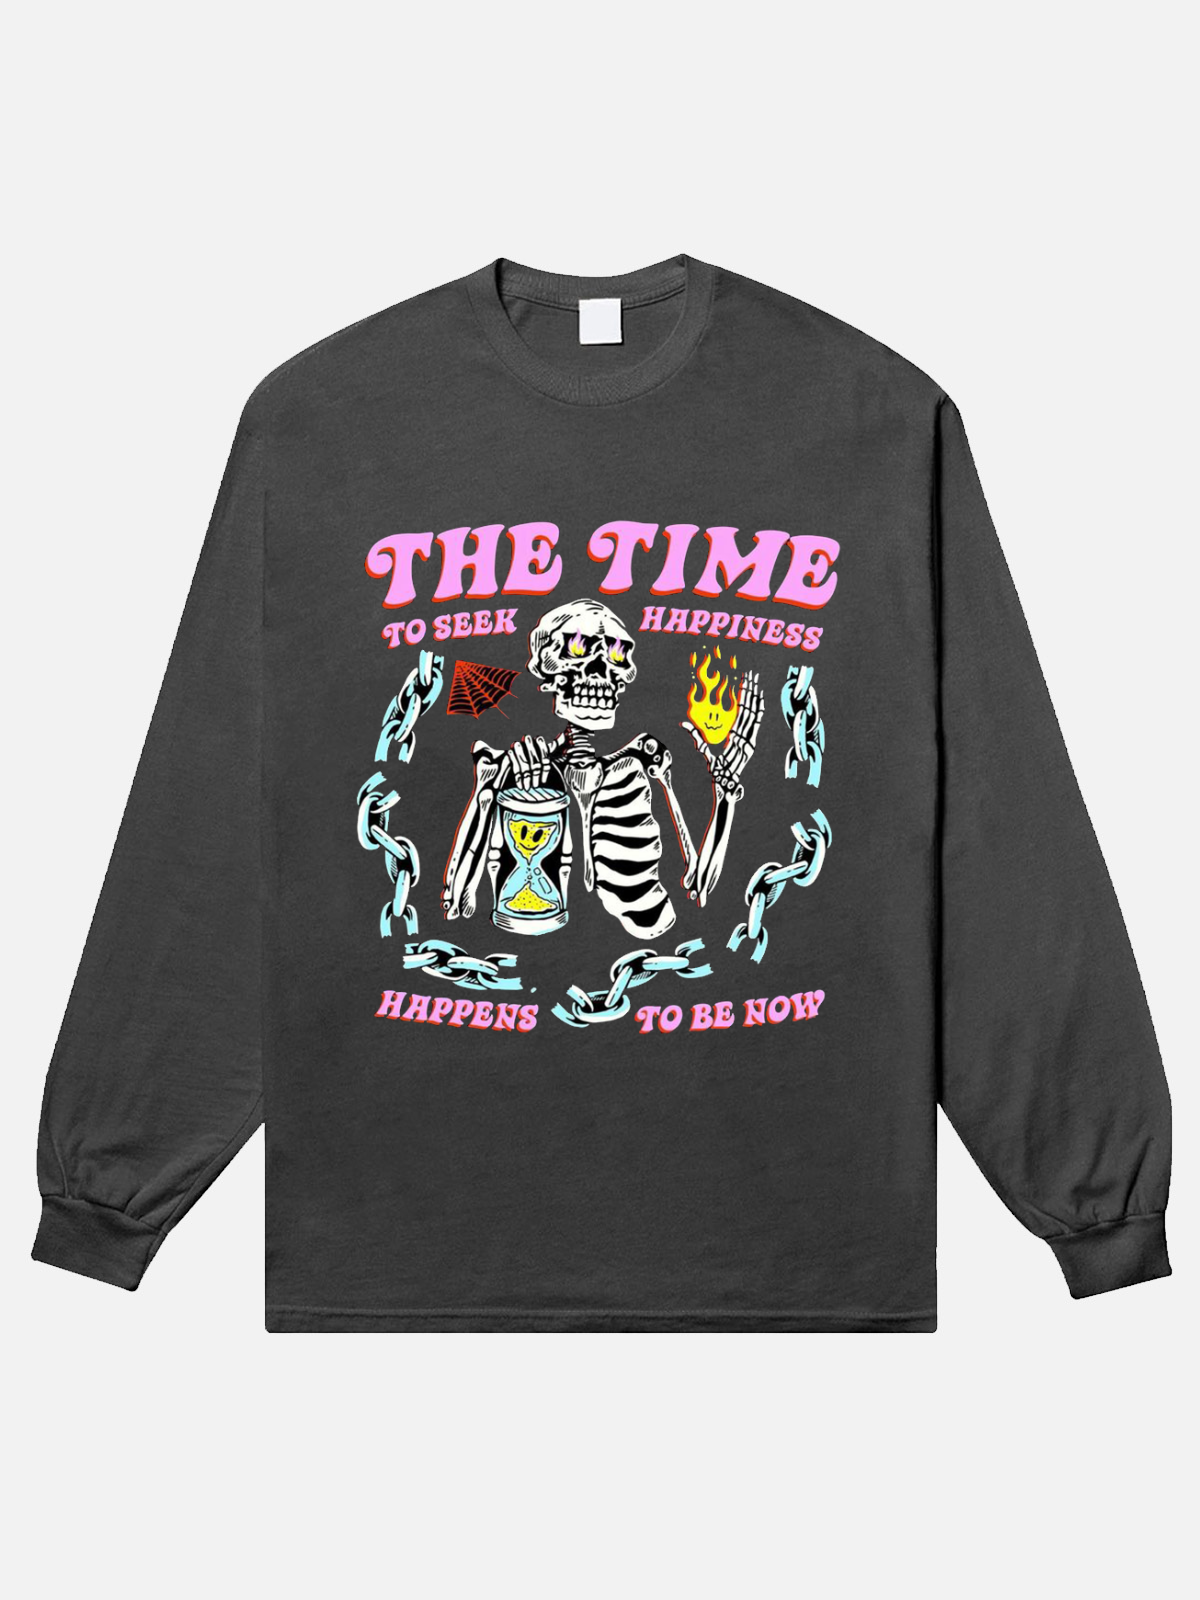 The Time Too Seek Happinesss Long Sleeve T-Shirt